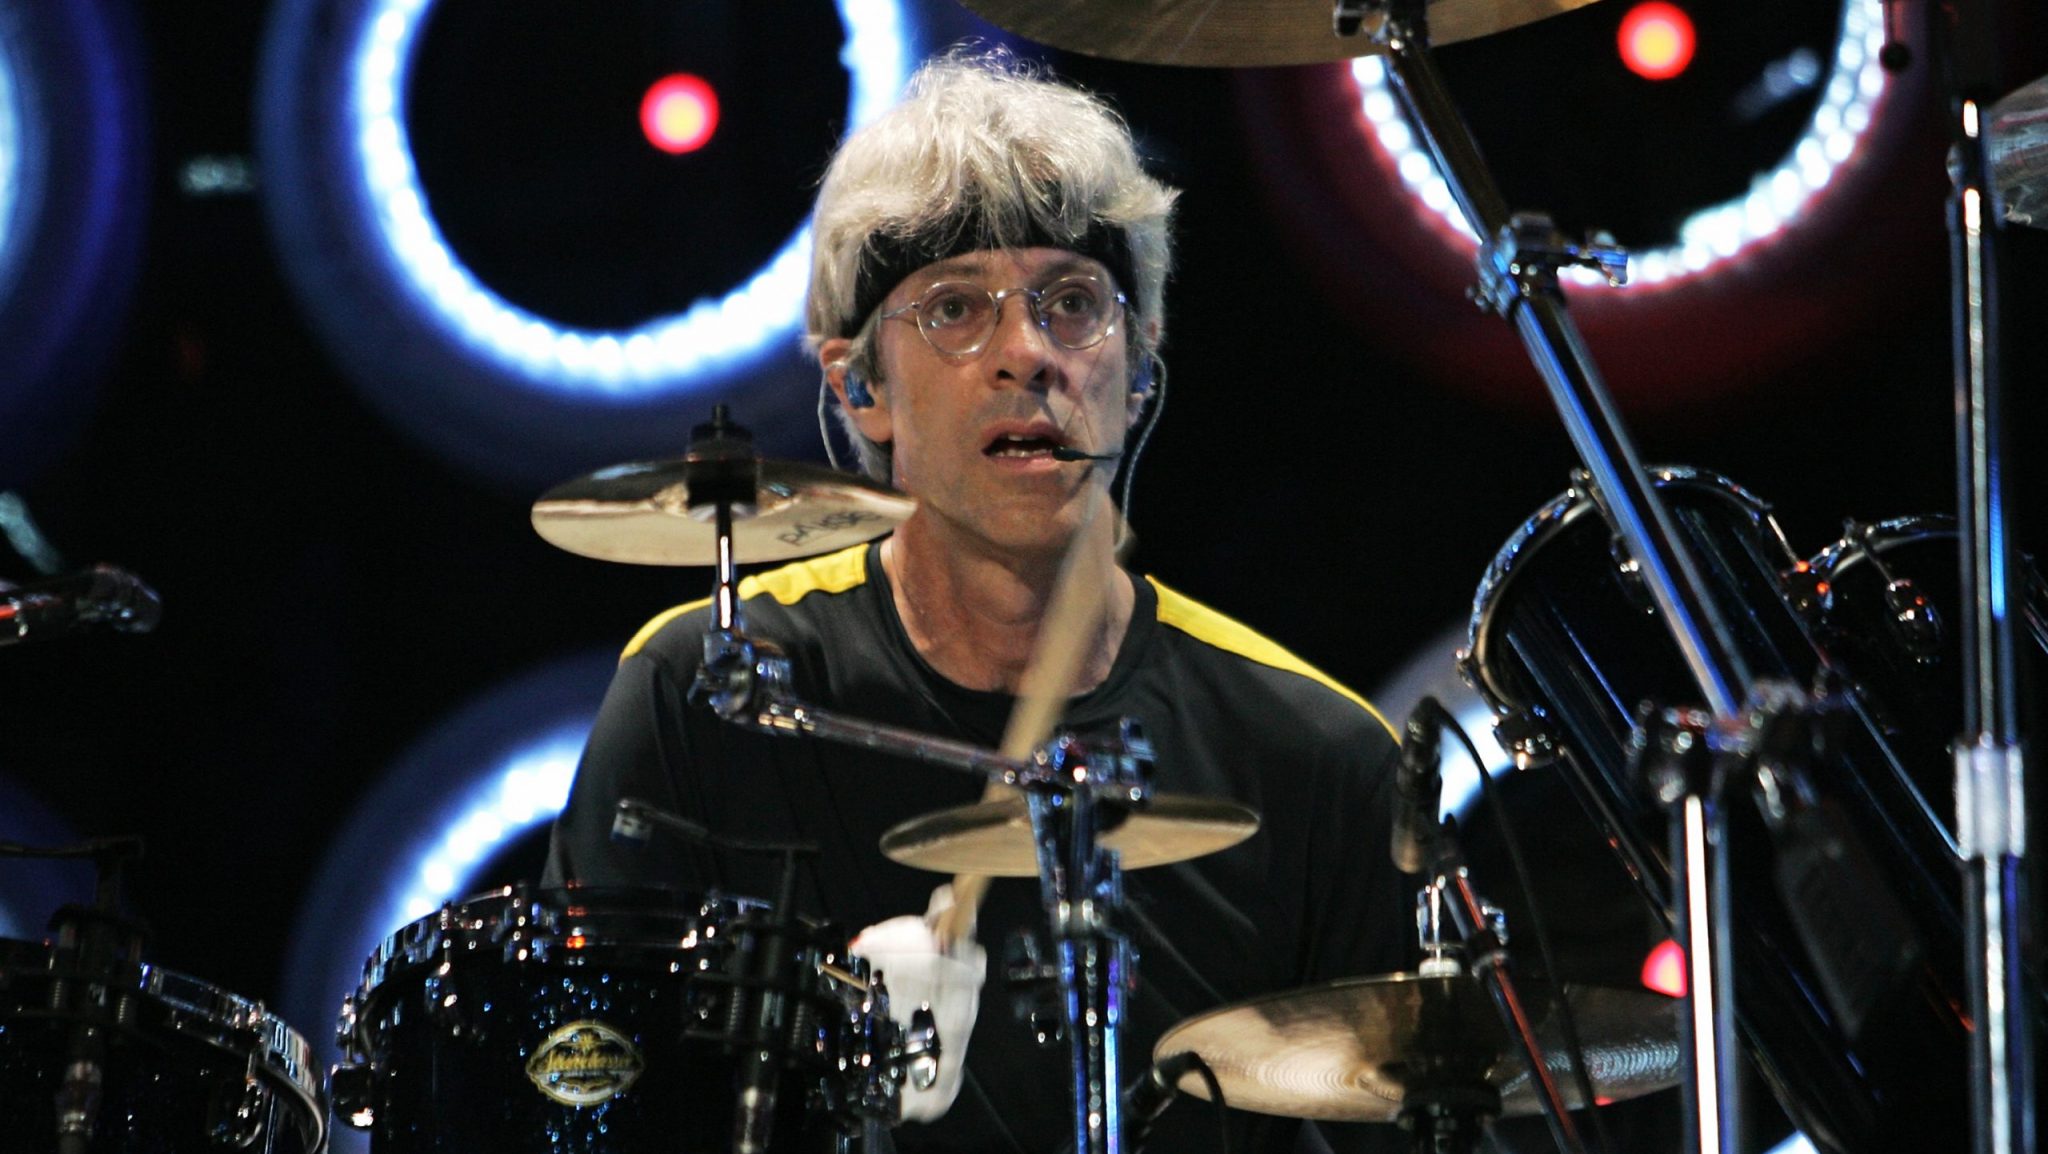 Drummer Stewart Copeland of The Police performs during the Live Earth concert at Giants Stadium, Saturday, July 7, 2007 in East Rutherford, N.J.